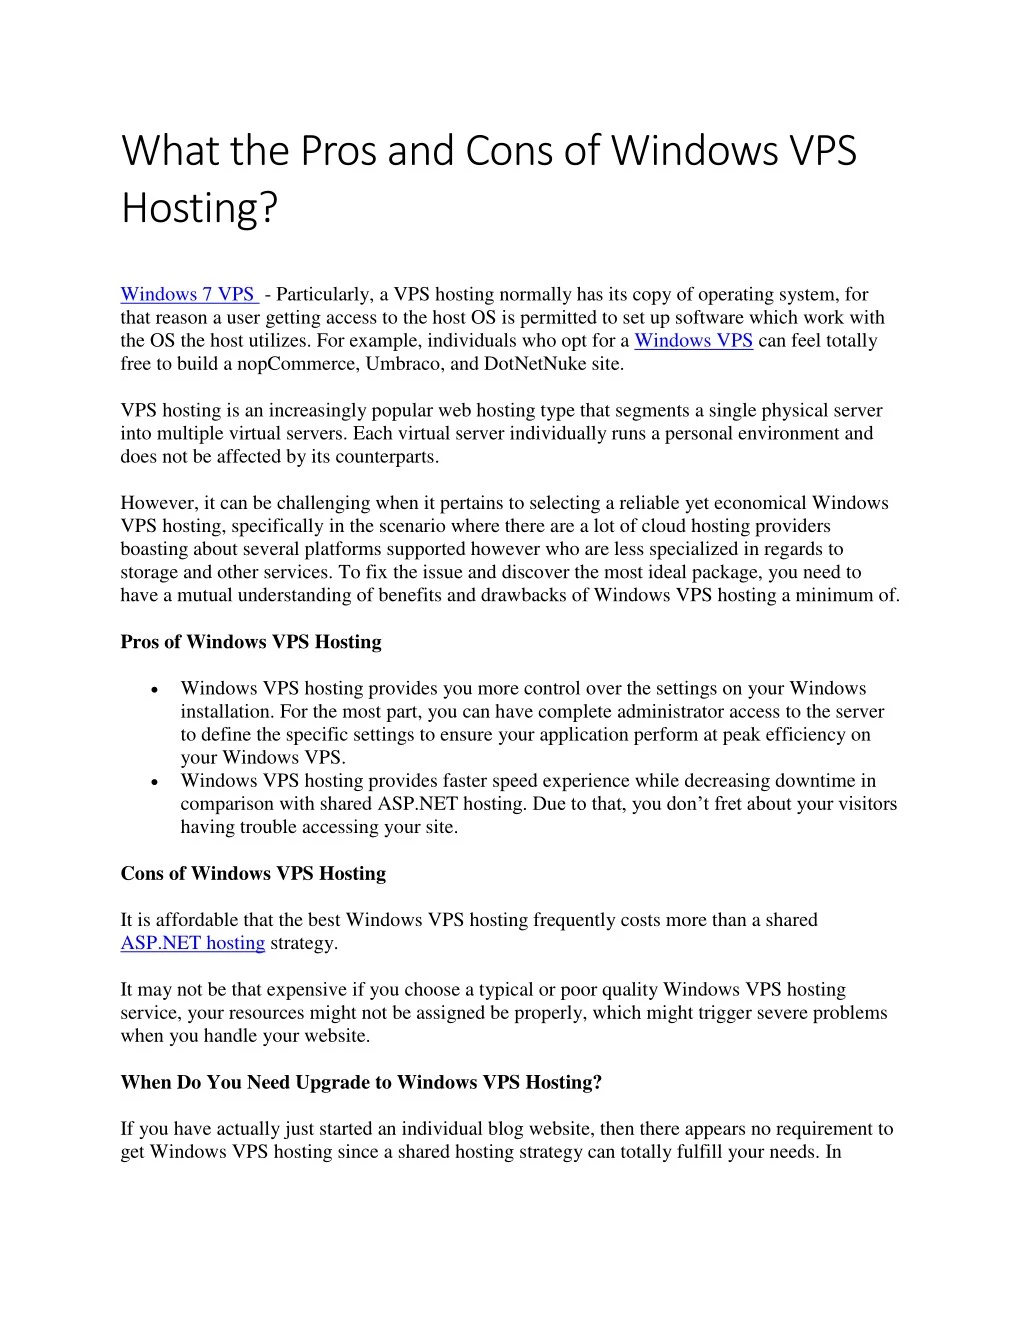 what the pros and cons of windows vps hosting